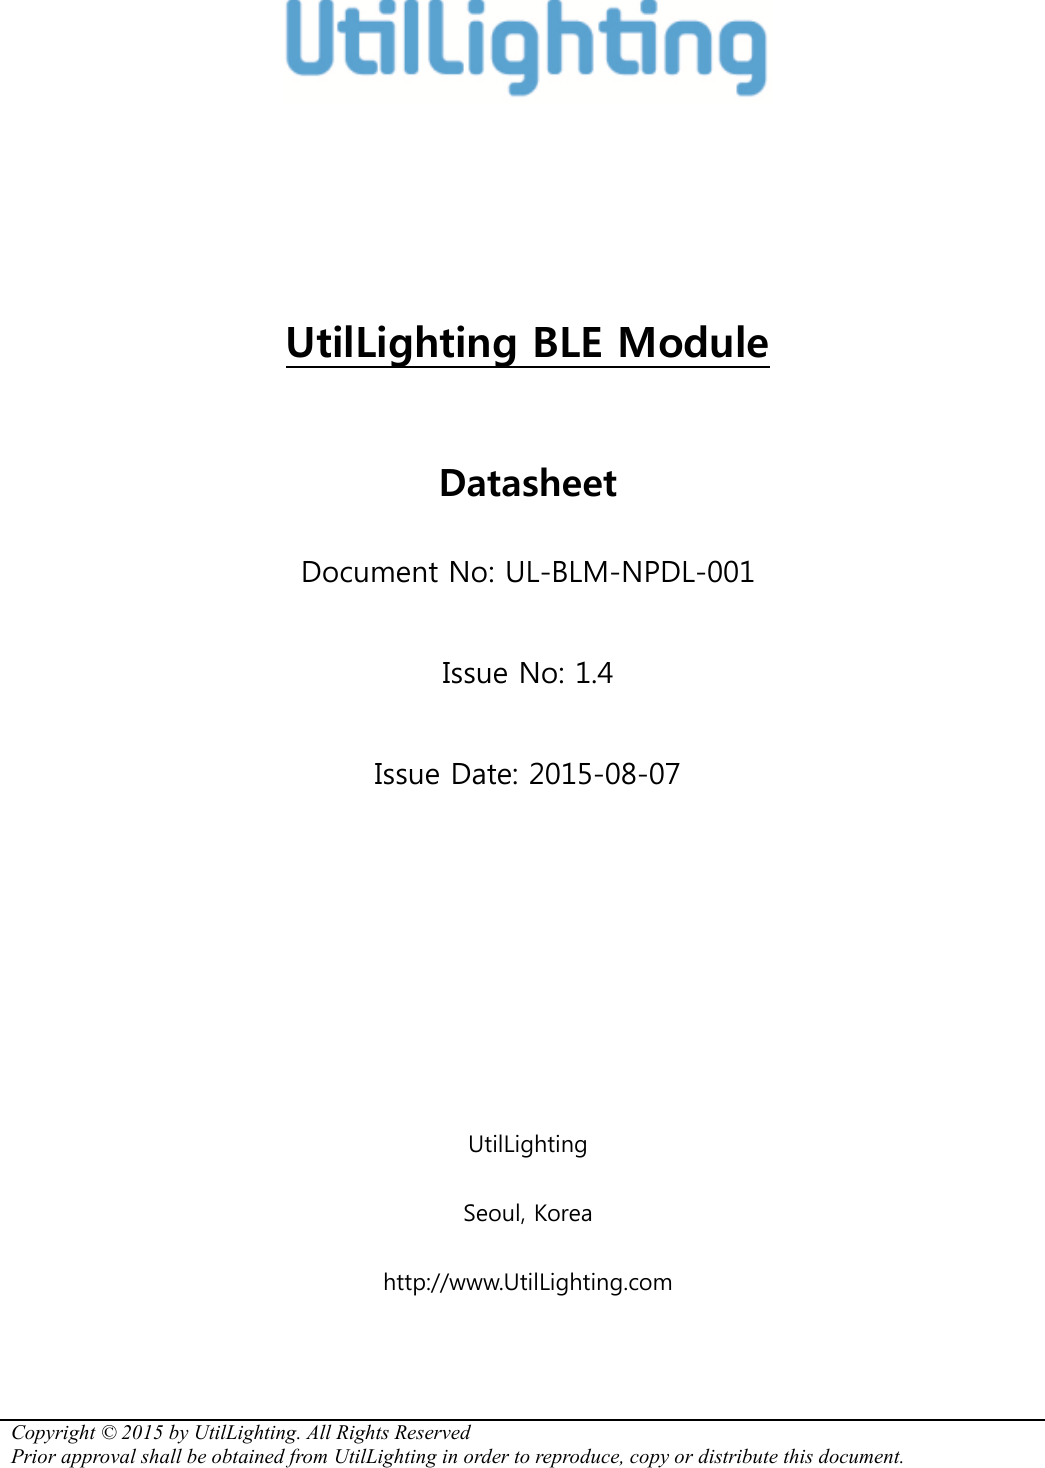 Copyright © 2015 by UtilLighting. All Rights Reserved  Prior approval shall be obtained from UtilLighting in order to reproduce, copy or distribute this document.     UtilLighting BLE Module  Datasheet Document No: UL-BLM-NPDL-001 Issue No: 1.4 Issue Date: 2015-08-07     UtilLighting Seoul, Korea http://www.UtilLighting.com